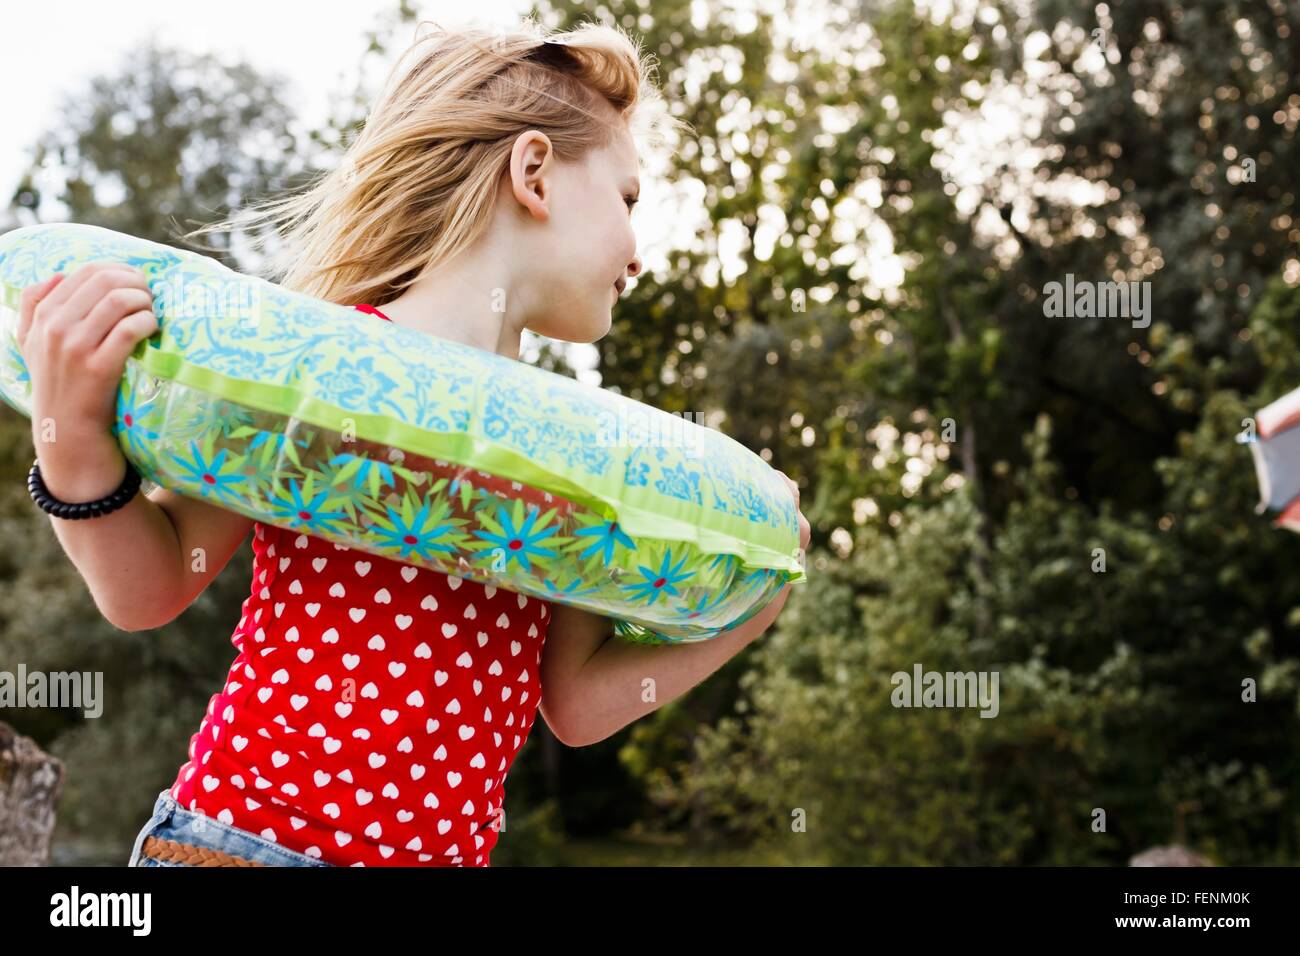 Girl playing with inflatable ring around her neck in park Stock Photo